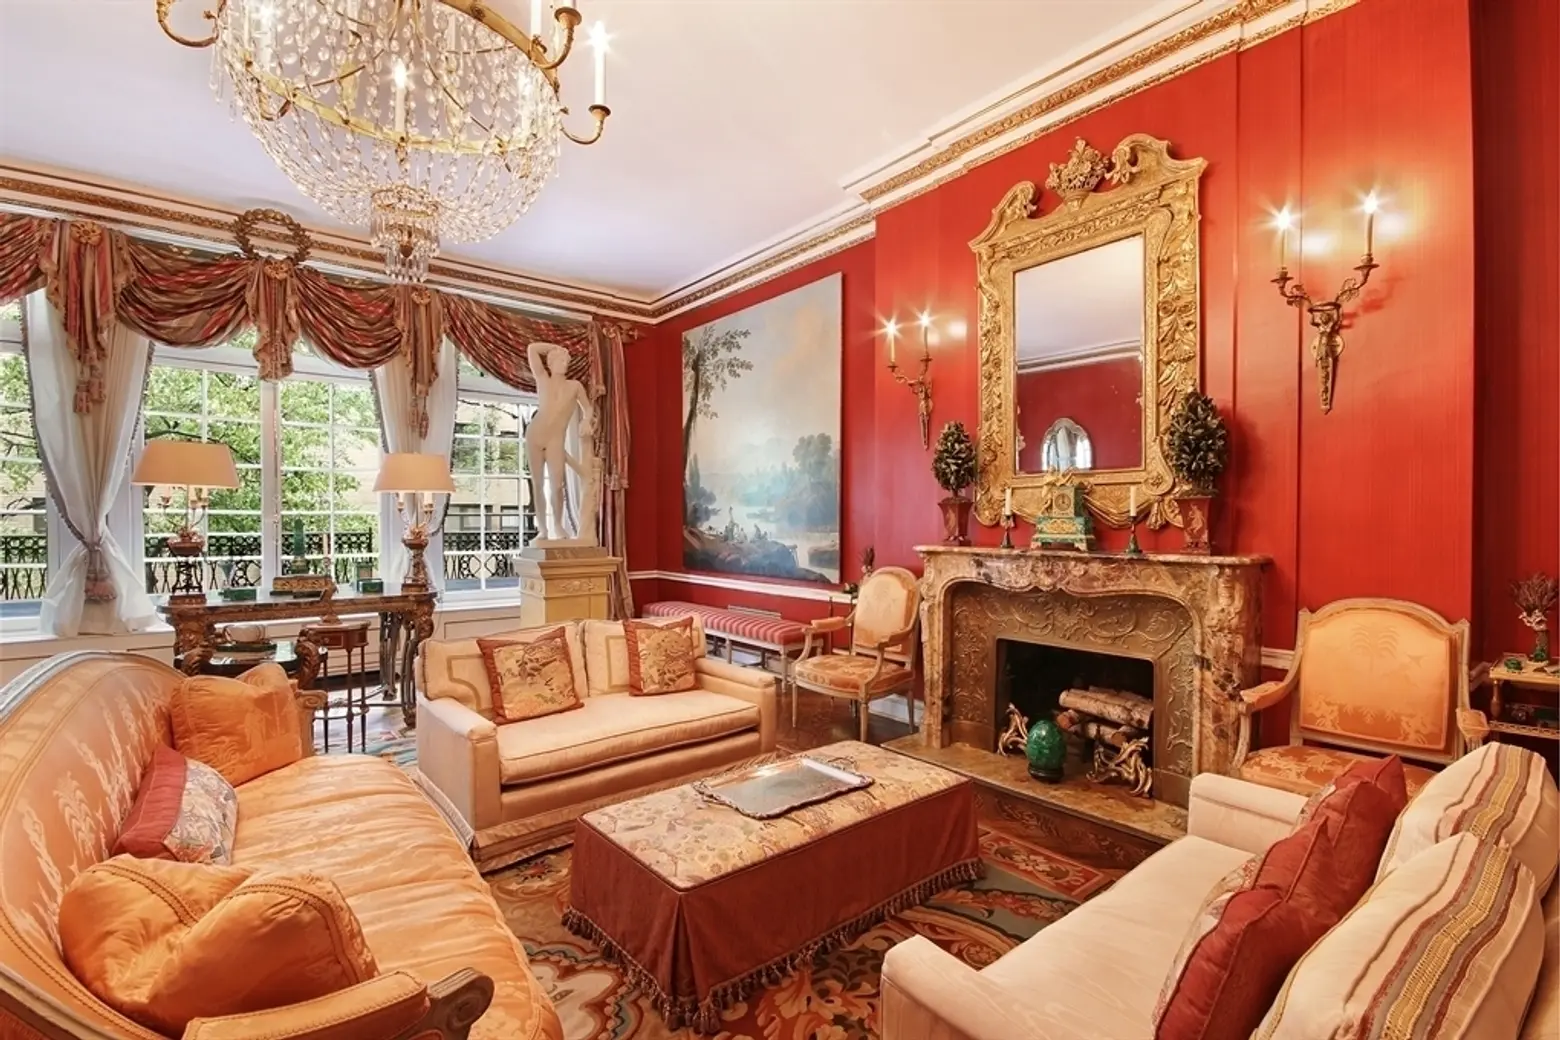 No One Will Dare Challenge Your Throne in This $29M Palatial Pad